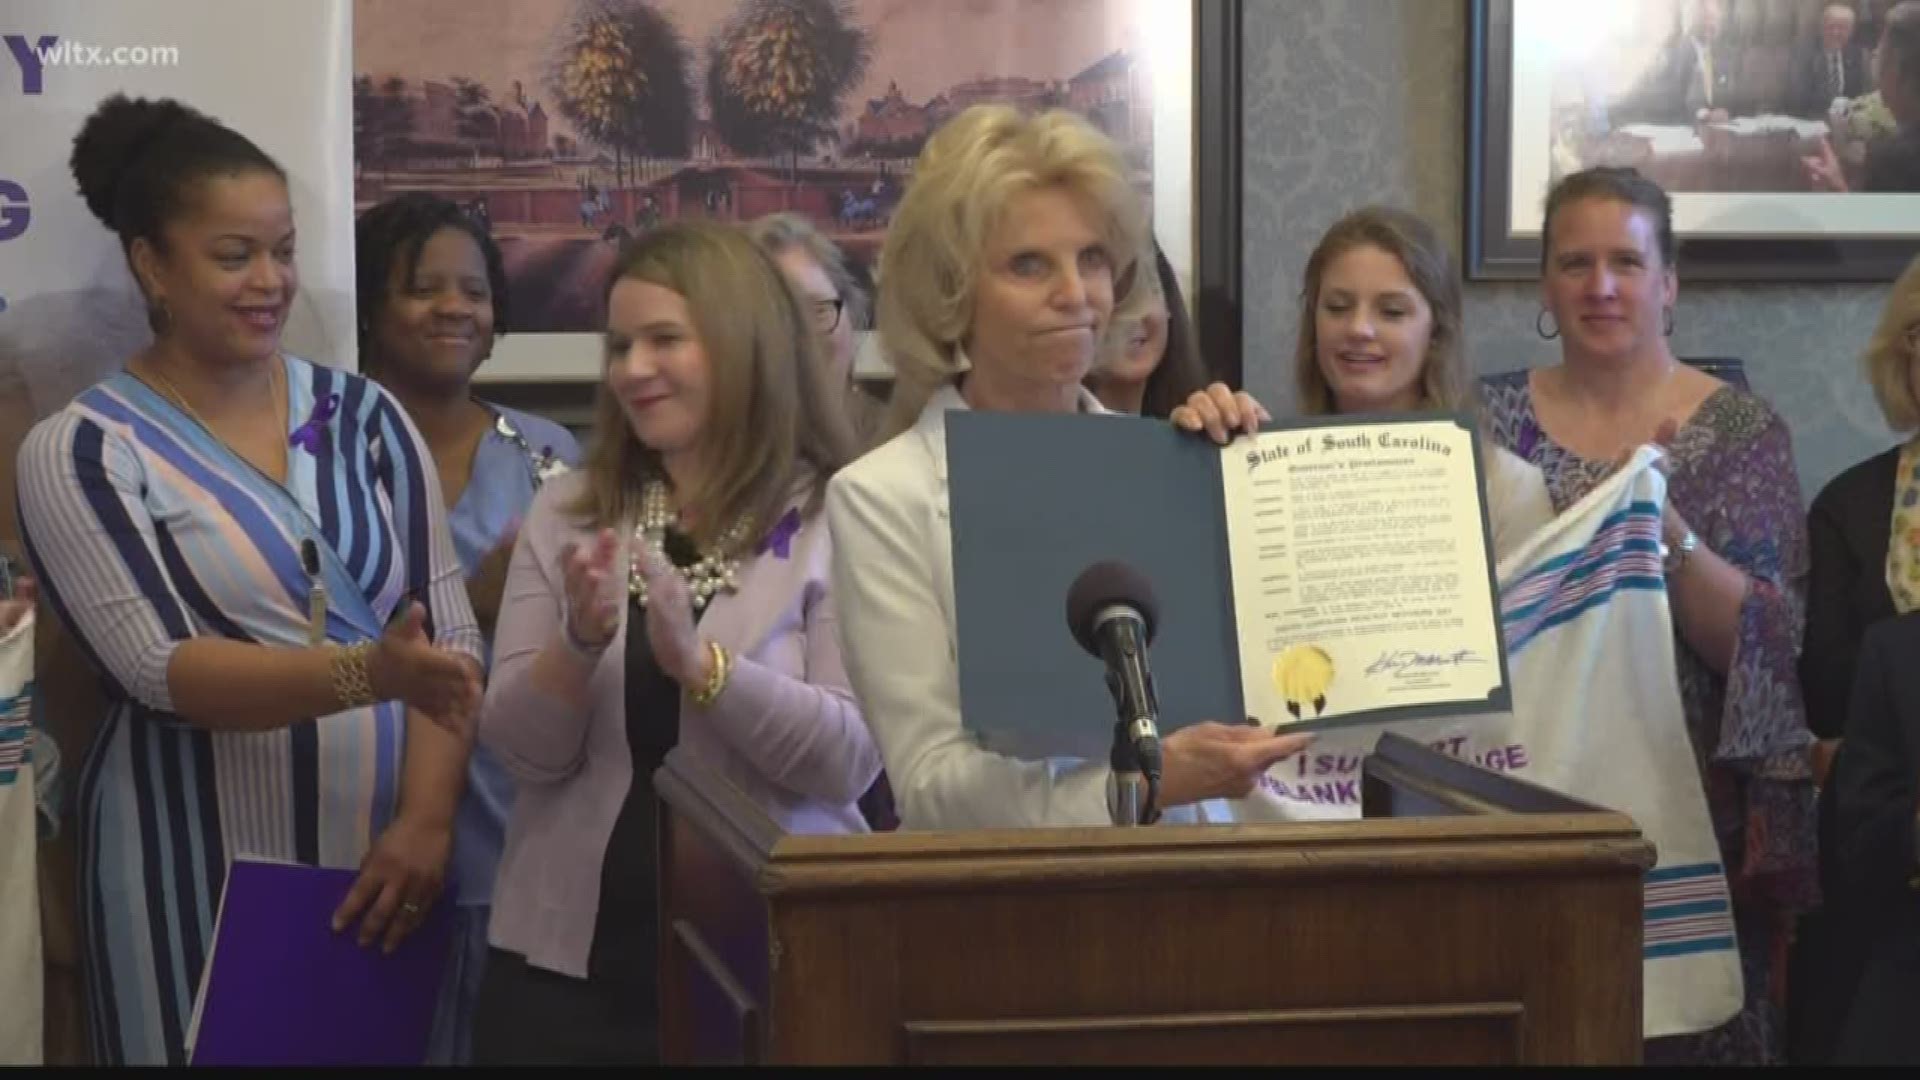 Volunteers and advocates from the March of Dimes organization came out to the Statehouse where Gov. Henry McMaster and his wife Peggy adopted May 1 as "South Carolina Healthy Mother’s Day."